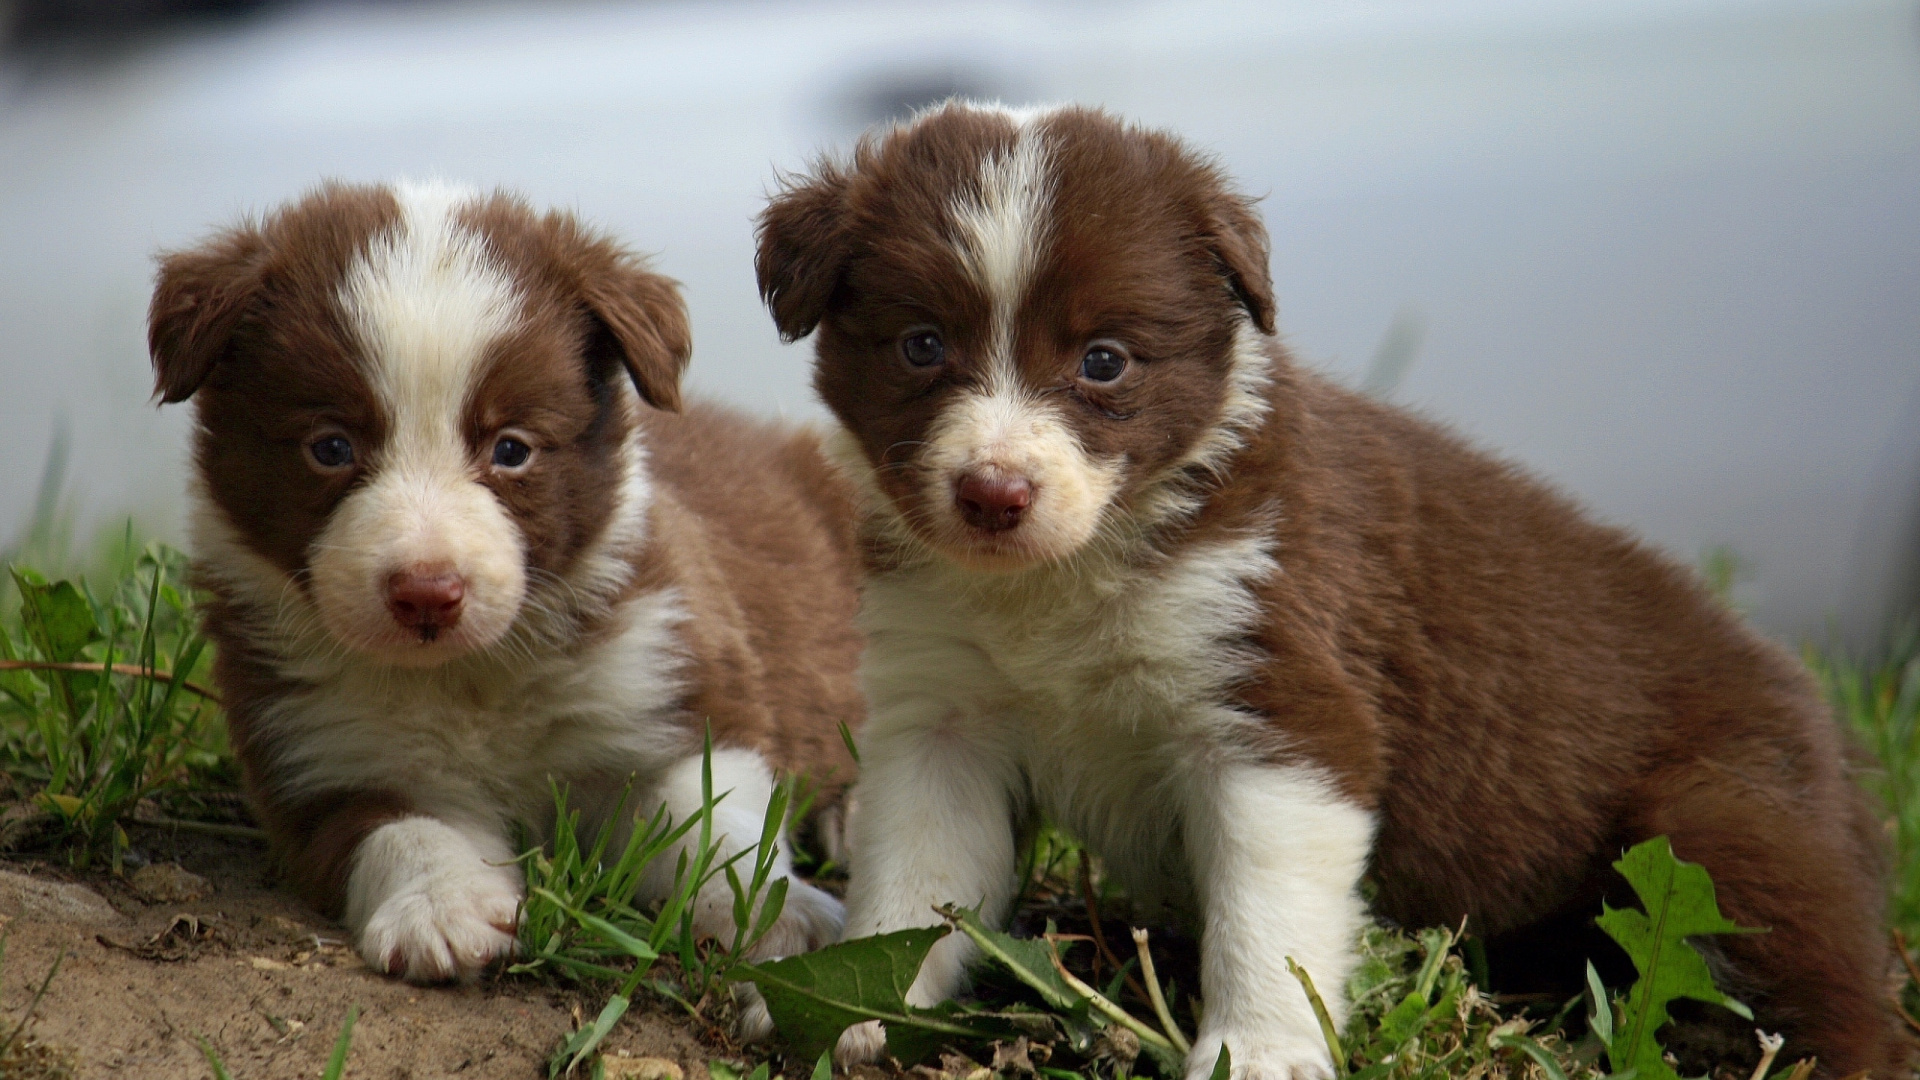 Brown and White Short Coated Puppy on Green Grass During Daytime. Wallpaper in 1920x1080 Resolution